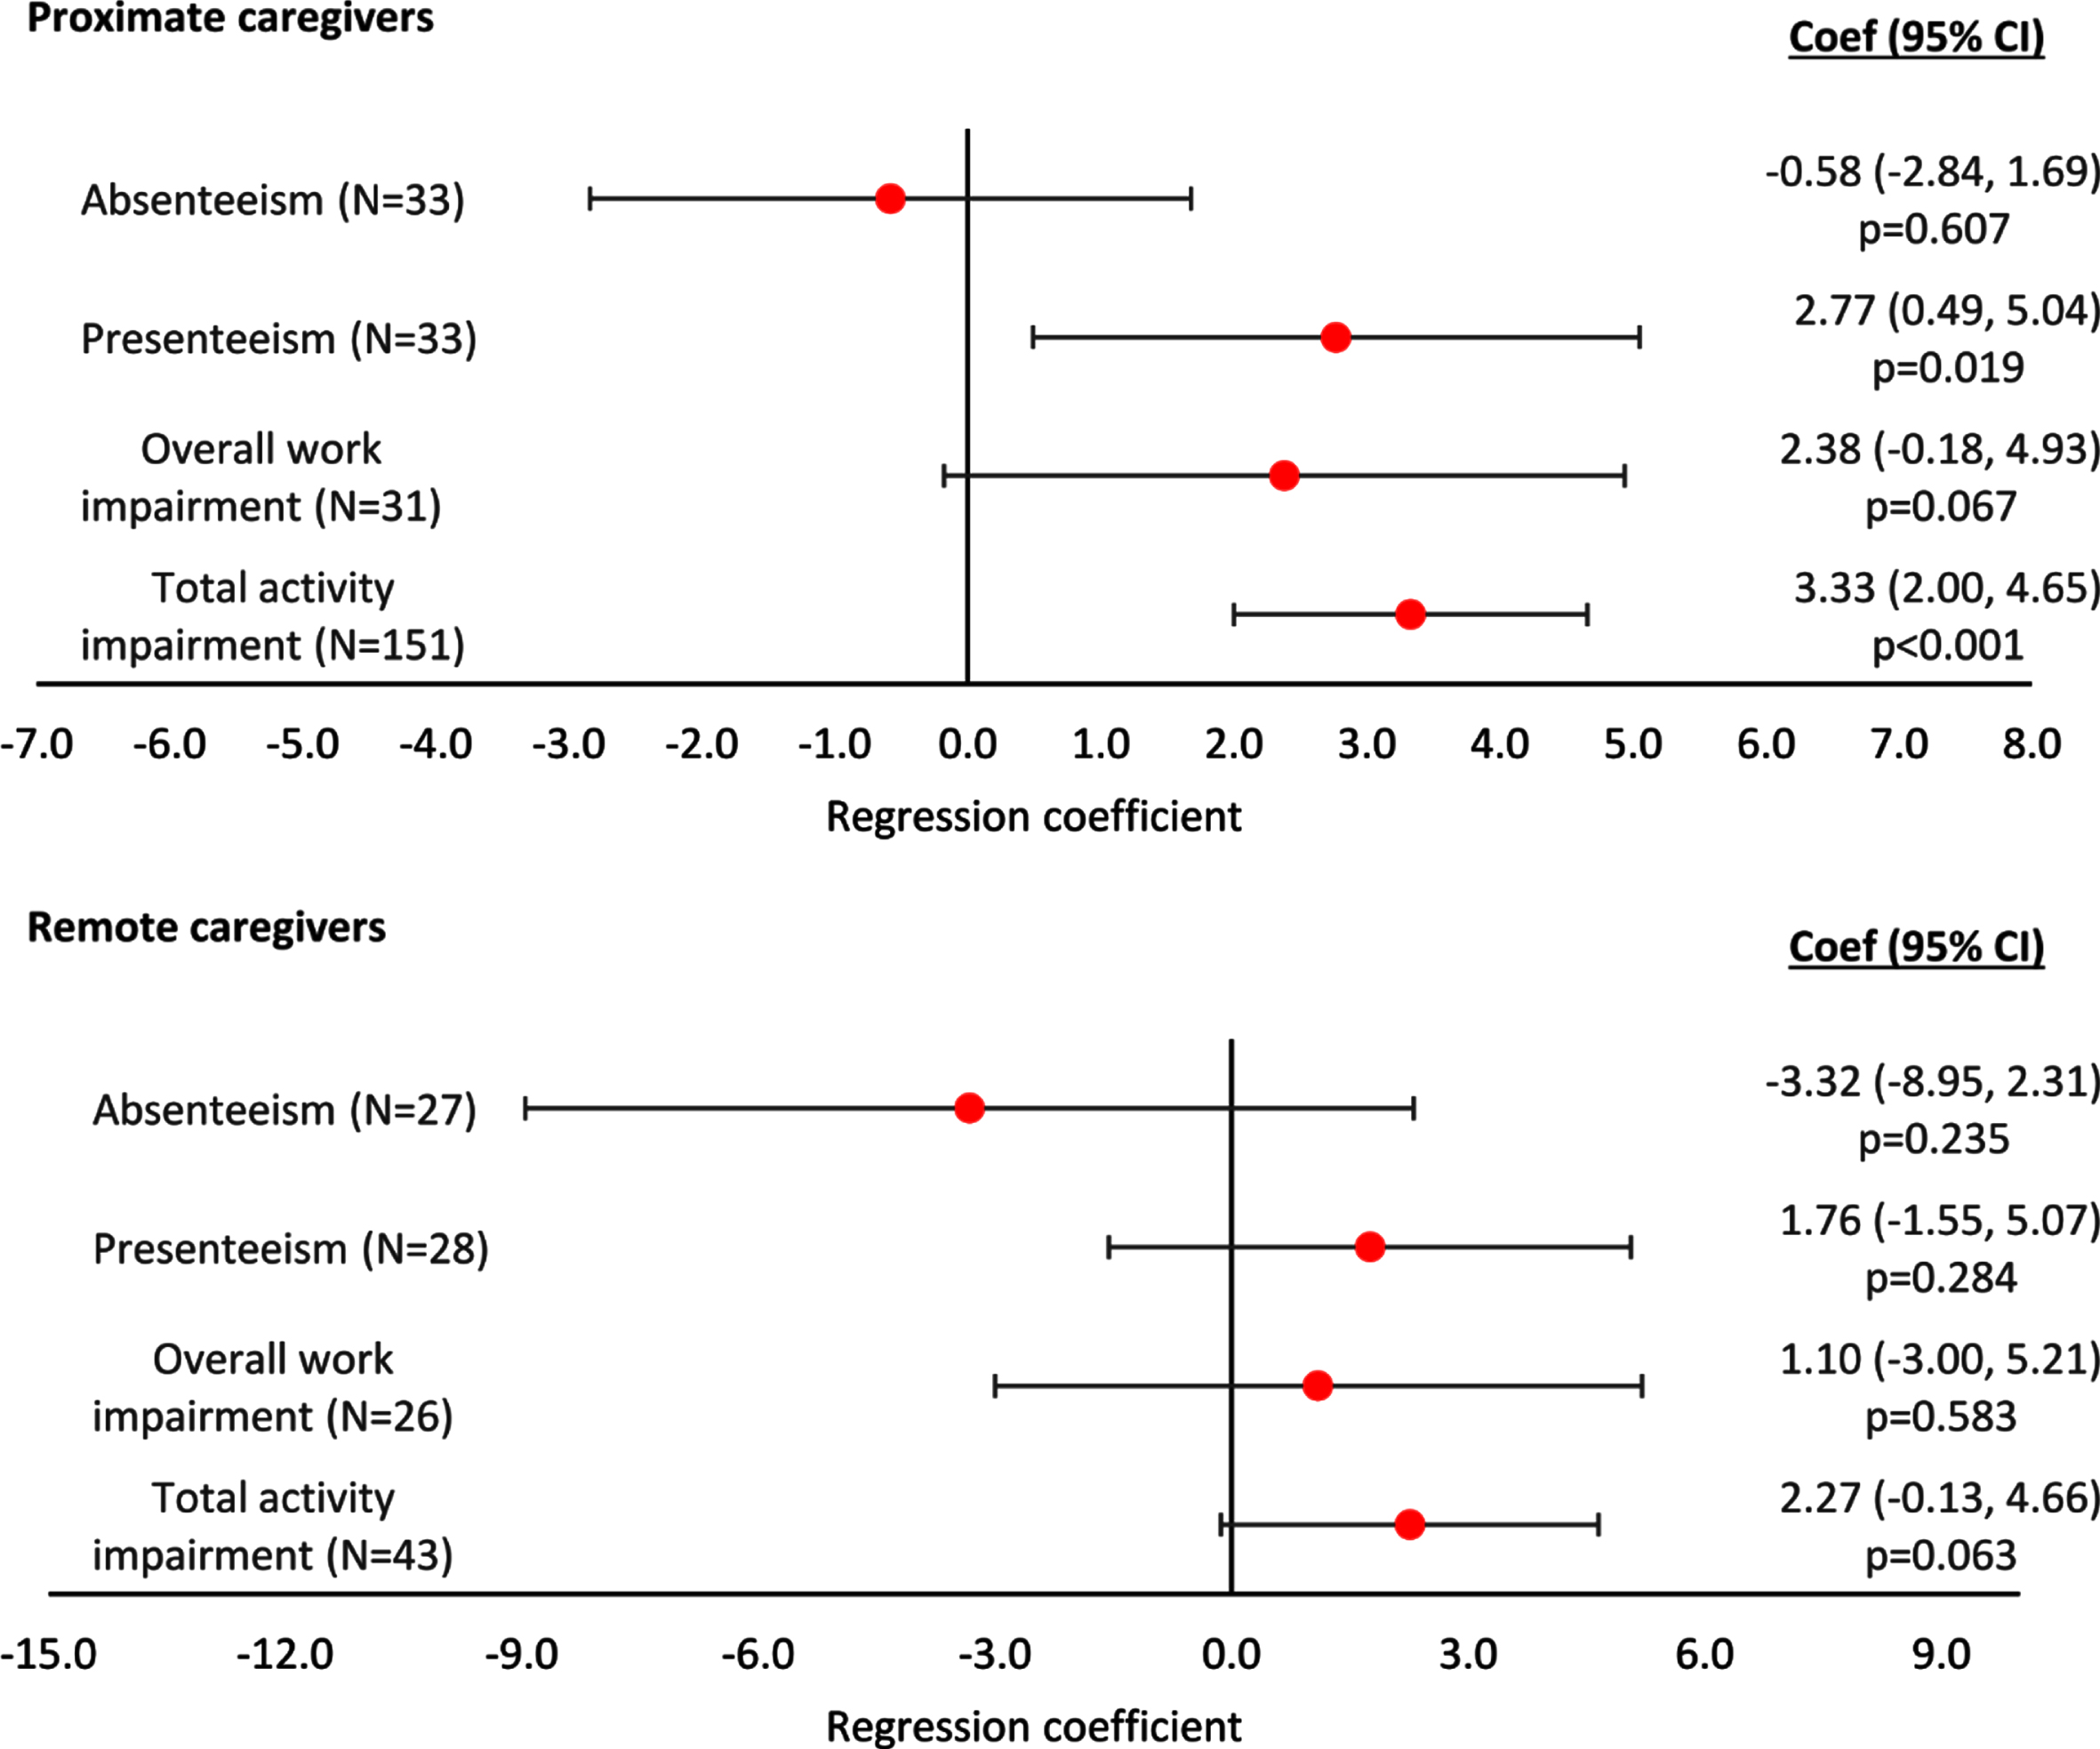 Linear regression analysis of WPAI-assessed productivity and activity by agitation score and type of care. Proximate Care, caregiver living with patient; Remote Care, caregiver not living with patient. A regression coefficient significantly different from 0 indicates the predicted outcomes differs significantly for different agitation scores; a coef > 0 implies a worse outcome with higher agitation scores, a coef < 0 implies a better outcome with higher agitation scores. All regressions were controlled for patient demographics (age and sex) and clinical characteristics (time since diagnosis, current MMSE score). Coef, coefficient; CI, confidence interval; MMSE, Mini Mental State Examination; WPAI, Work Productivity and Activity Index.